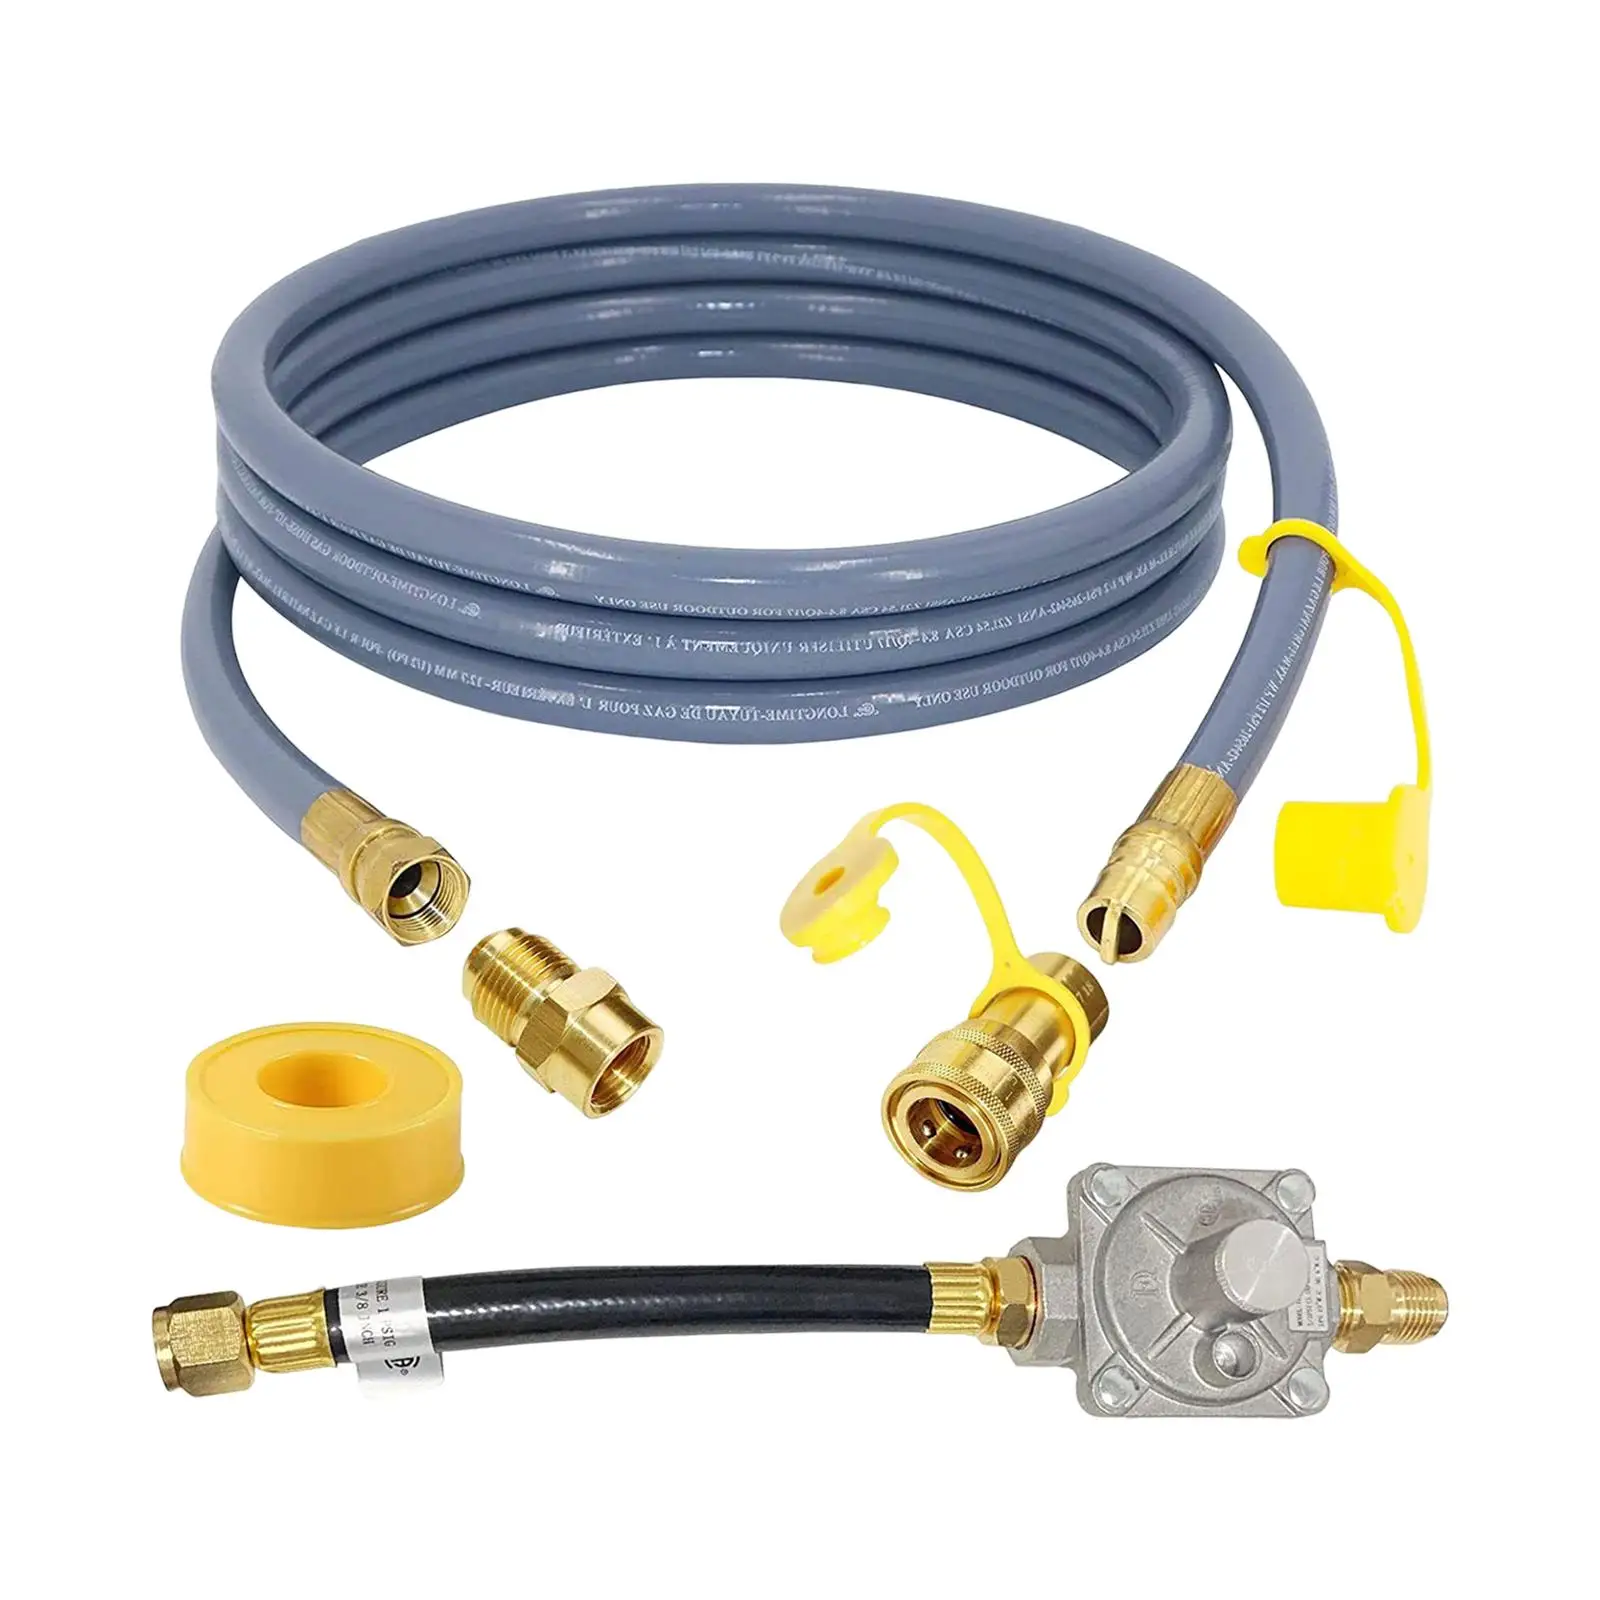 3Meter 1/2 Gas Hose with Quick Connect Fitting, Propane to Natural Gas Conversion Kit for Patio Heater, Grill, Fire Pit, BBQ